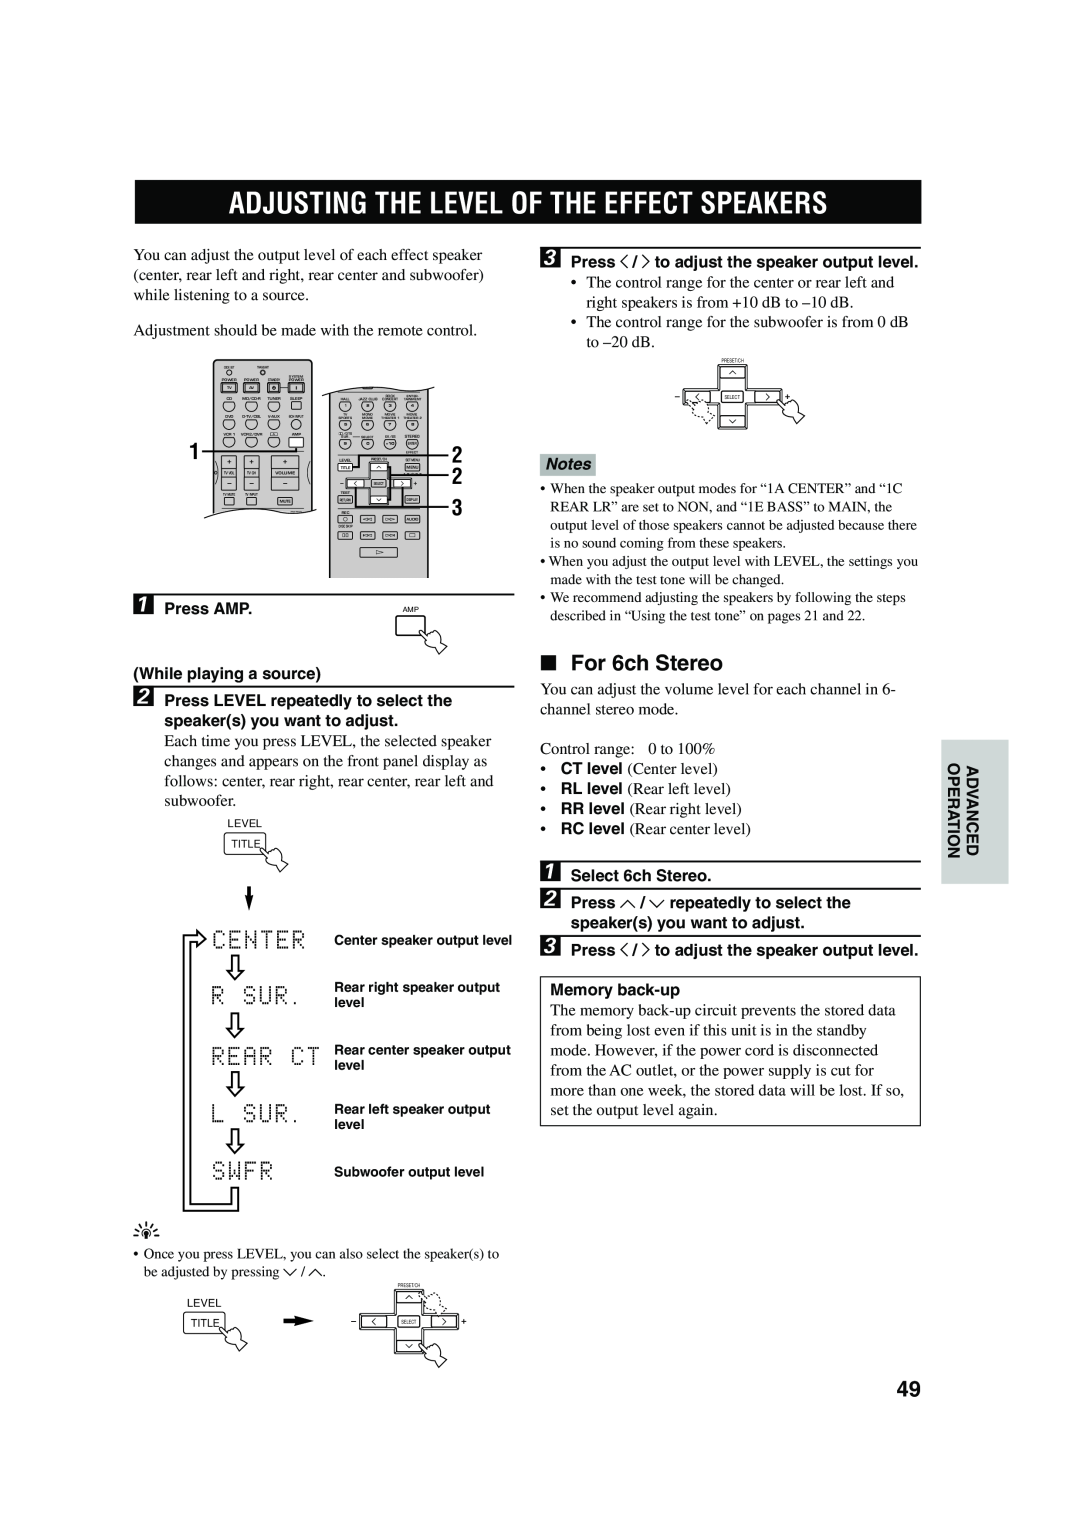 Yamaha HTR-5560 owner manual Adjusting The Level Of The Effect Speakers, For 6ch Stereo 